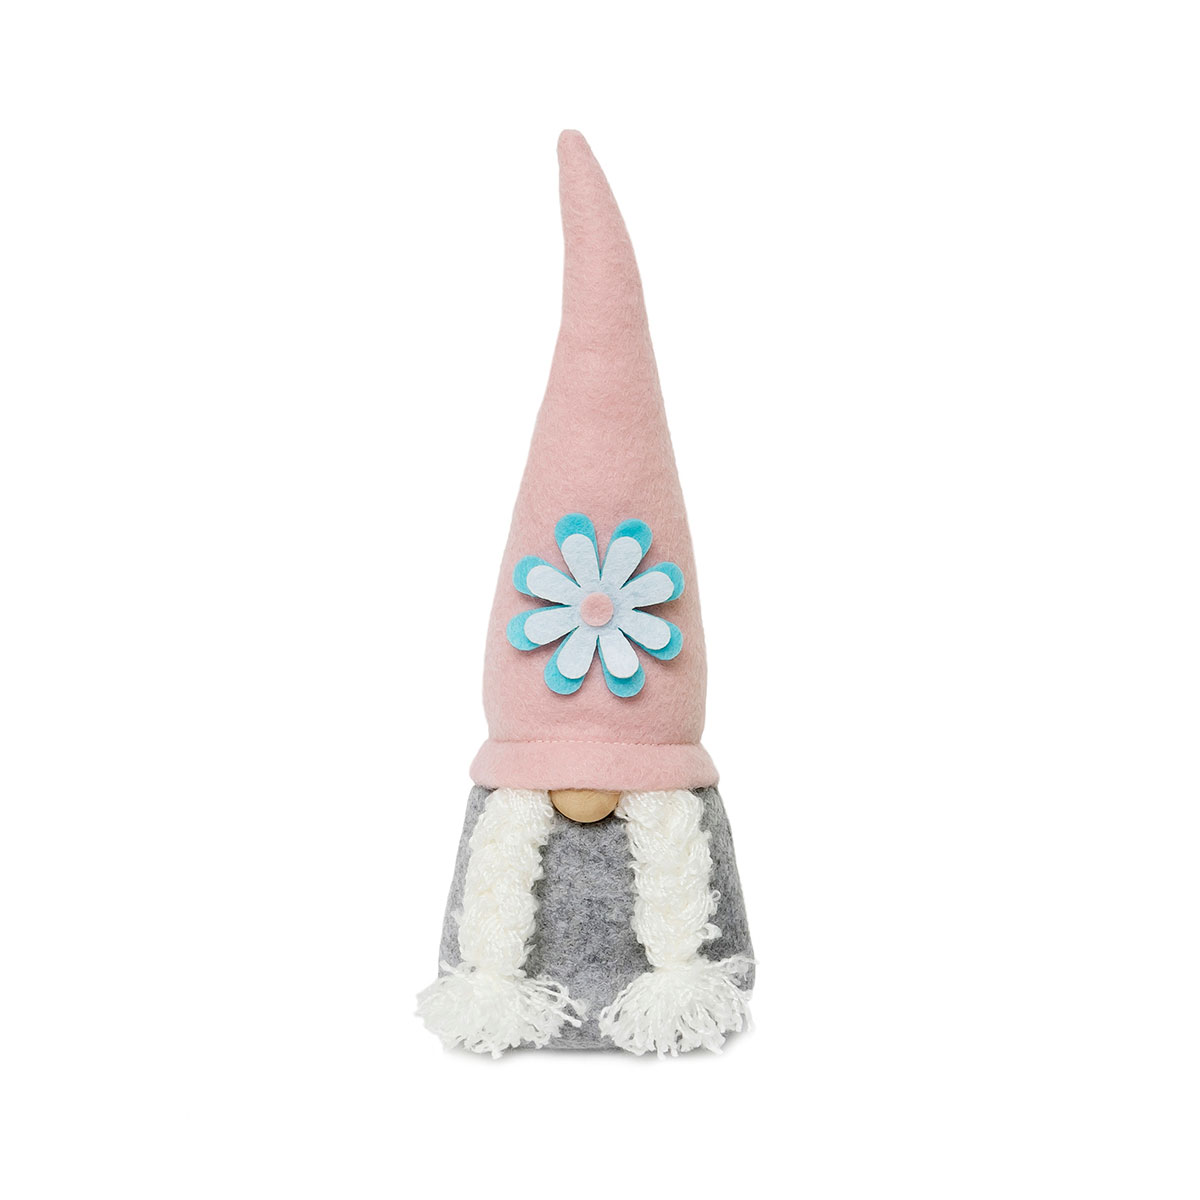 b50 Flower Power Gnome with Wood Nose 10" Small PINK